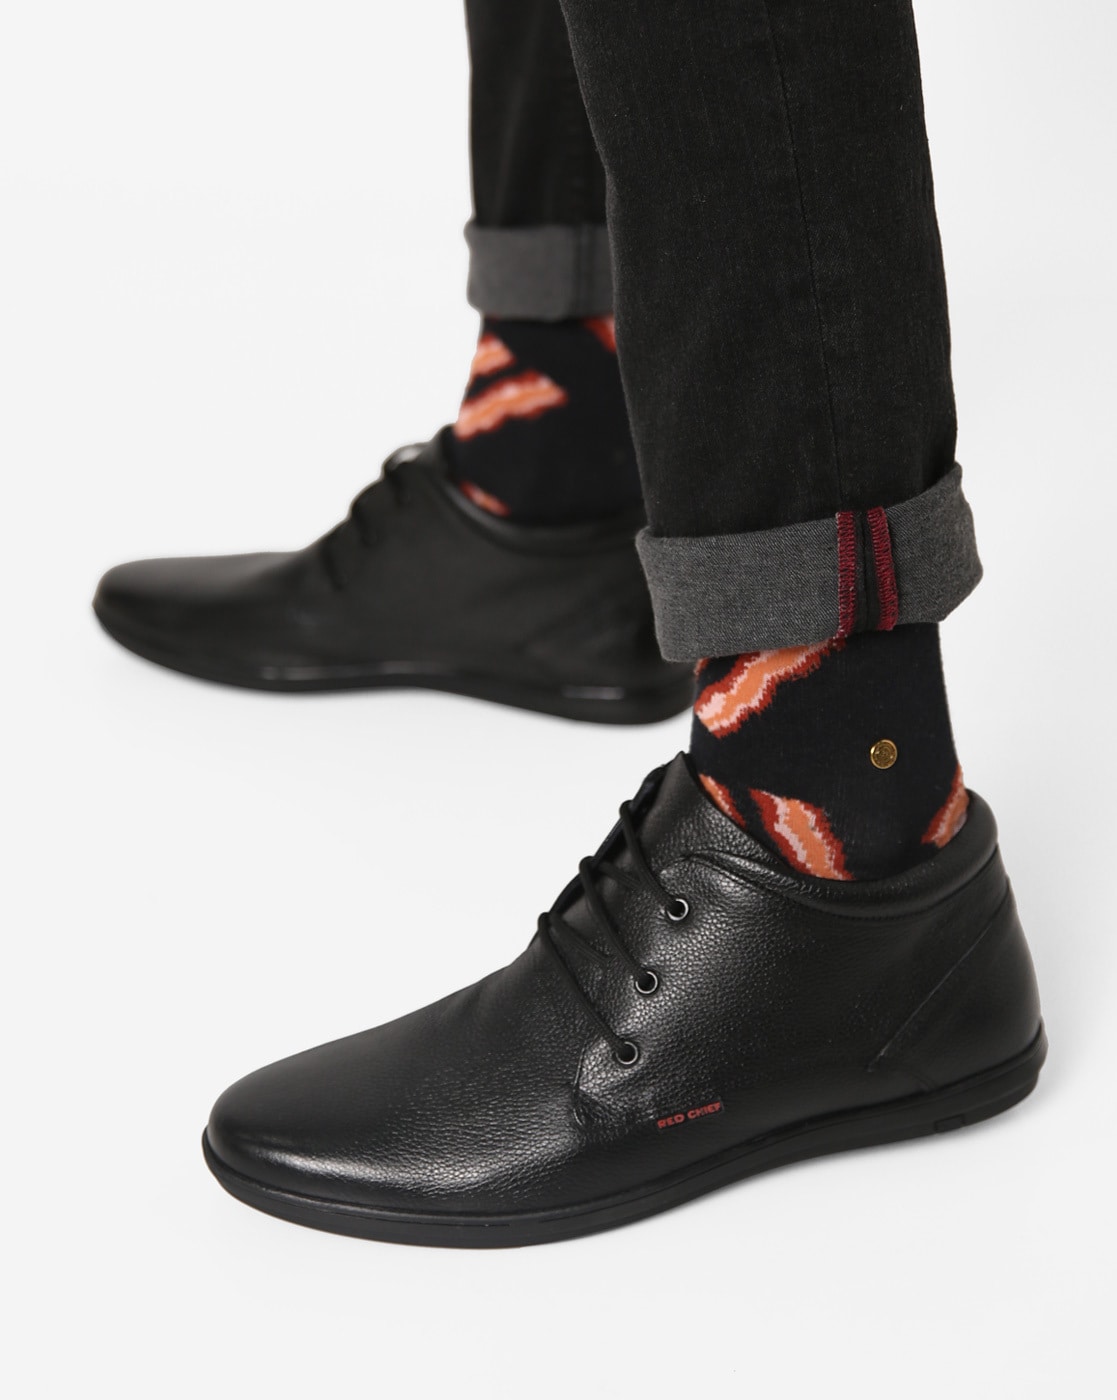 Black Formal Shoes for Men by RED CHIEF 